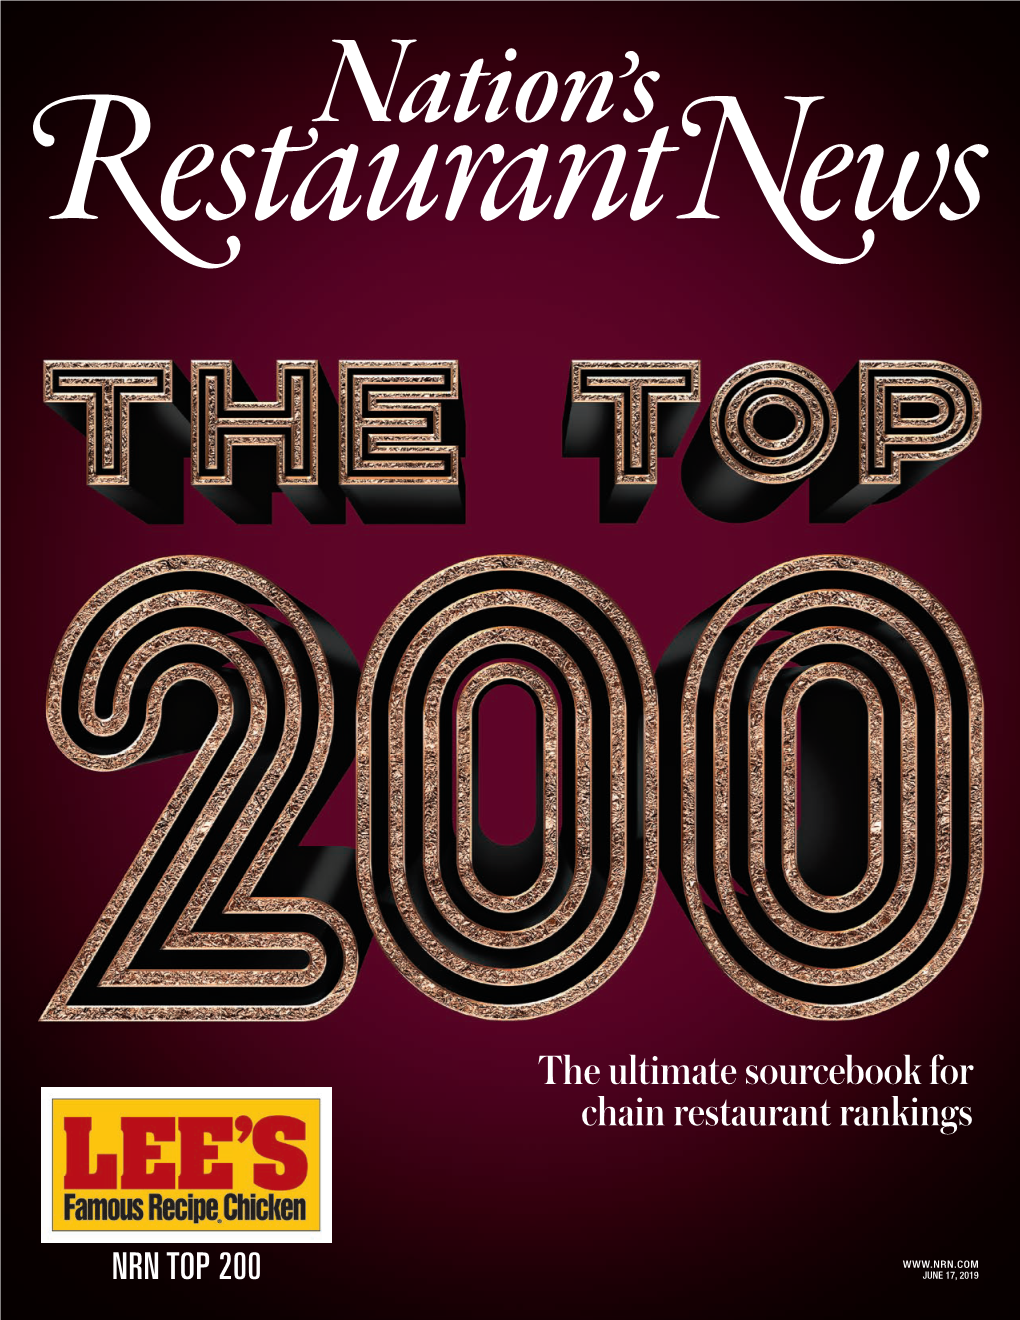 The Ultimate Sourcebook for Chain Restaurant Rankings